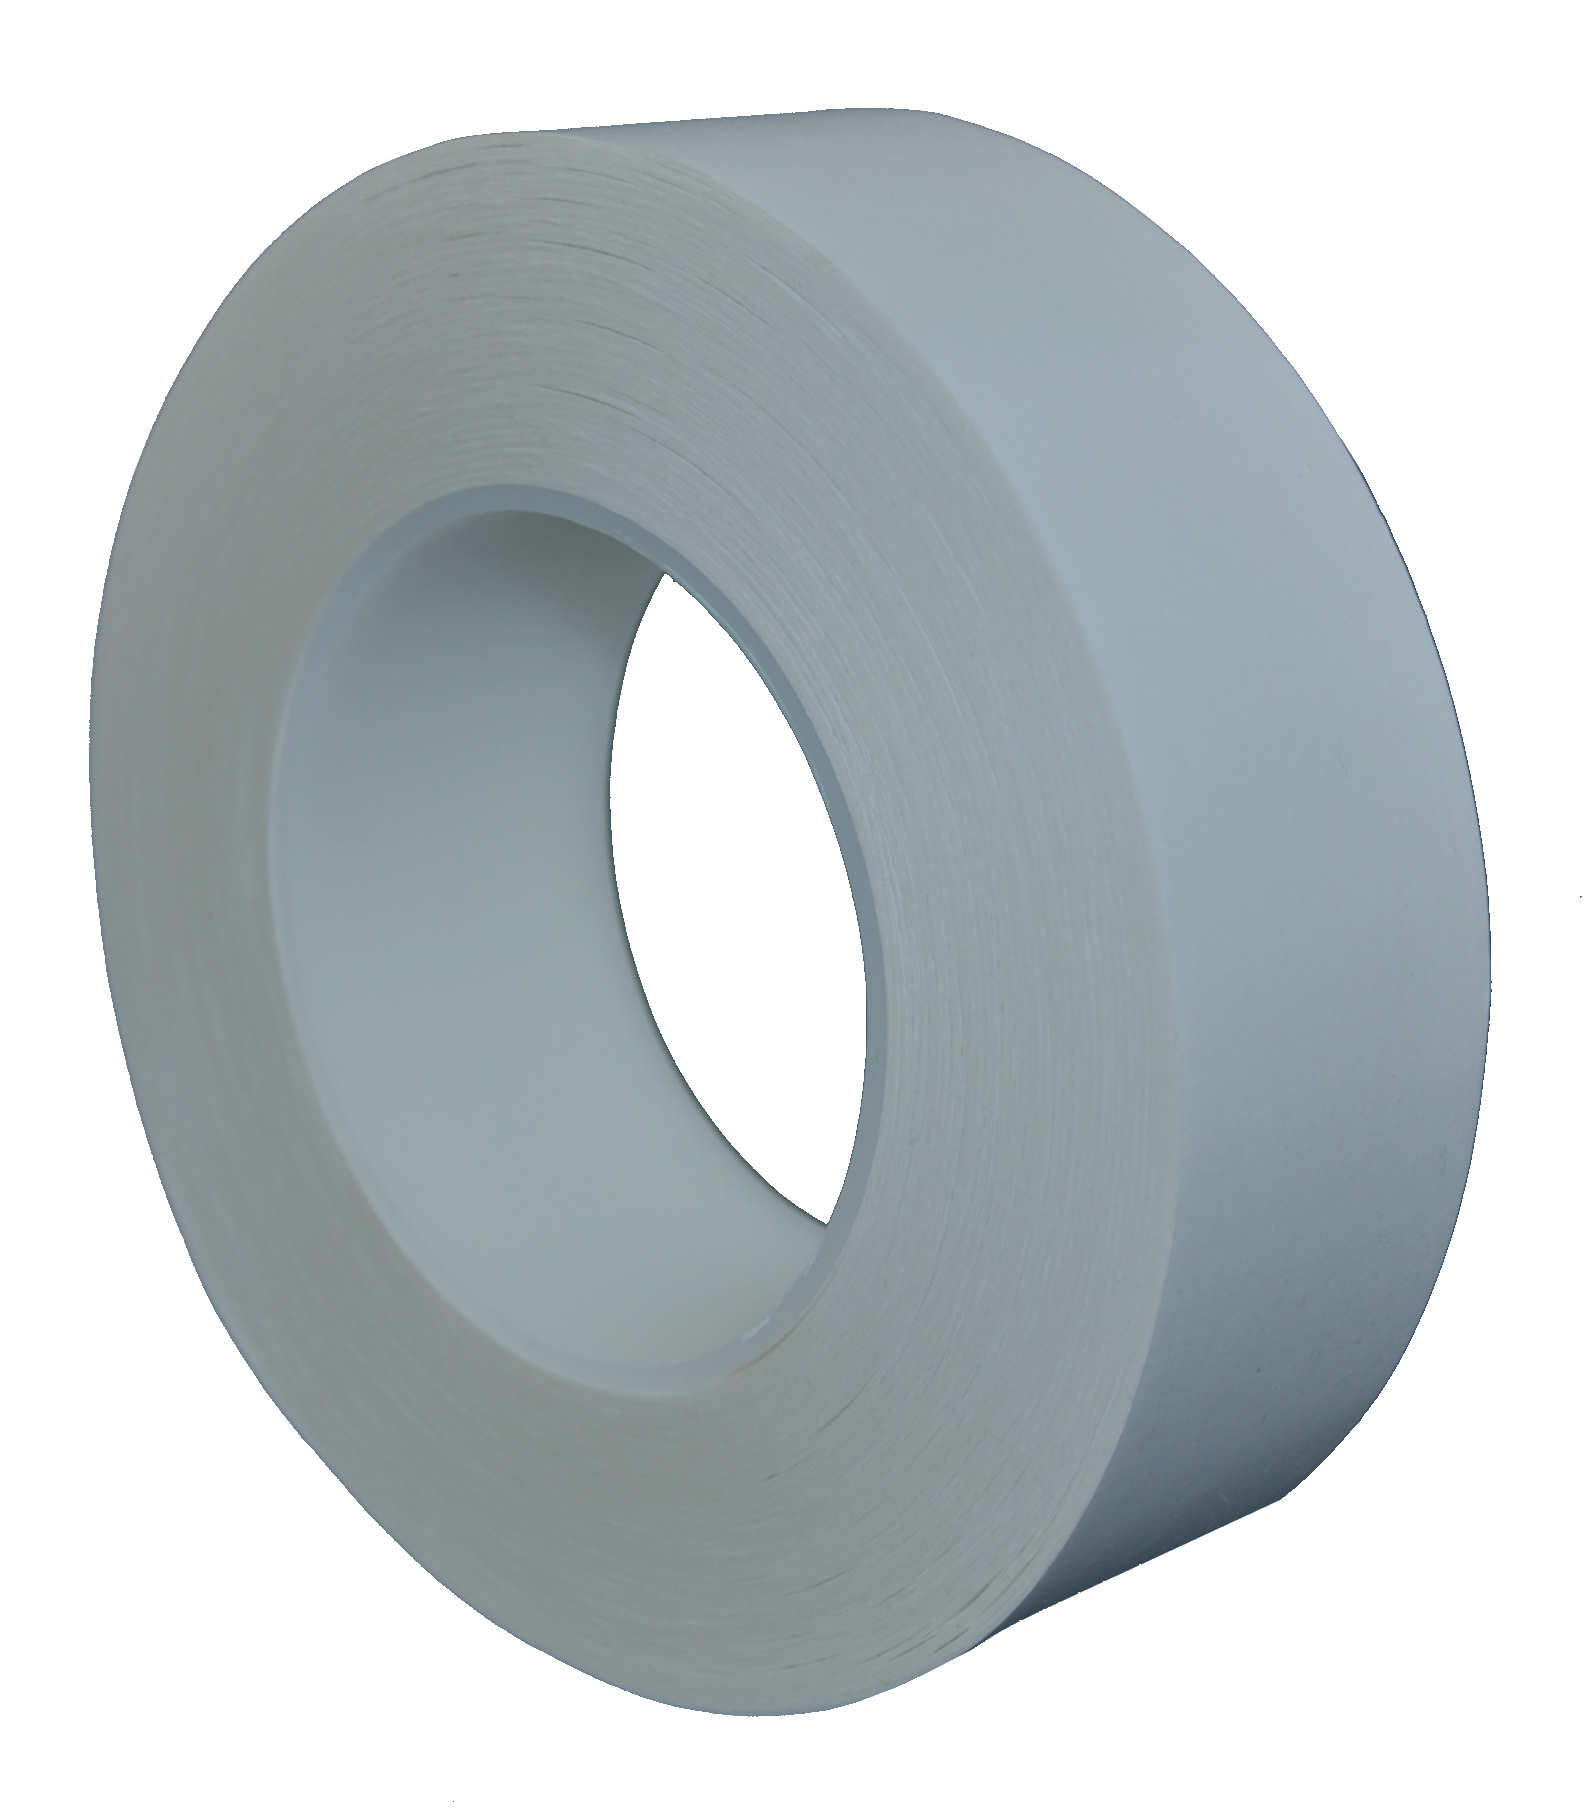 S-K-S double-sided adhesive tape with polyester backing 480, transparent, 38 mm x 50 m, 0.09 mm